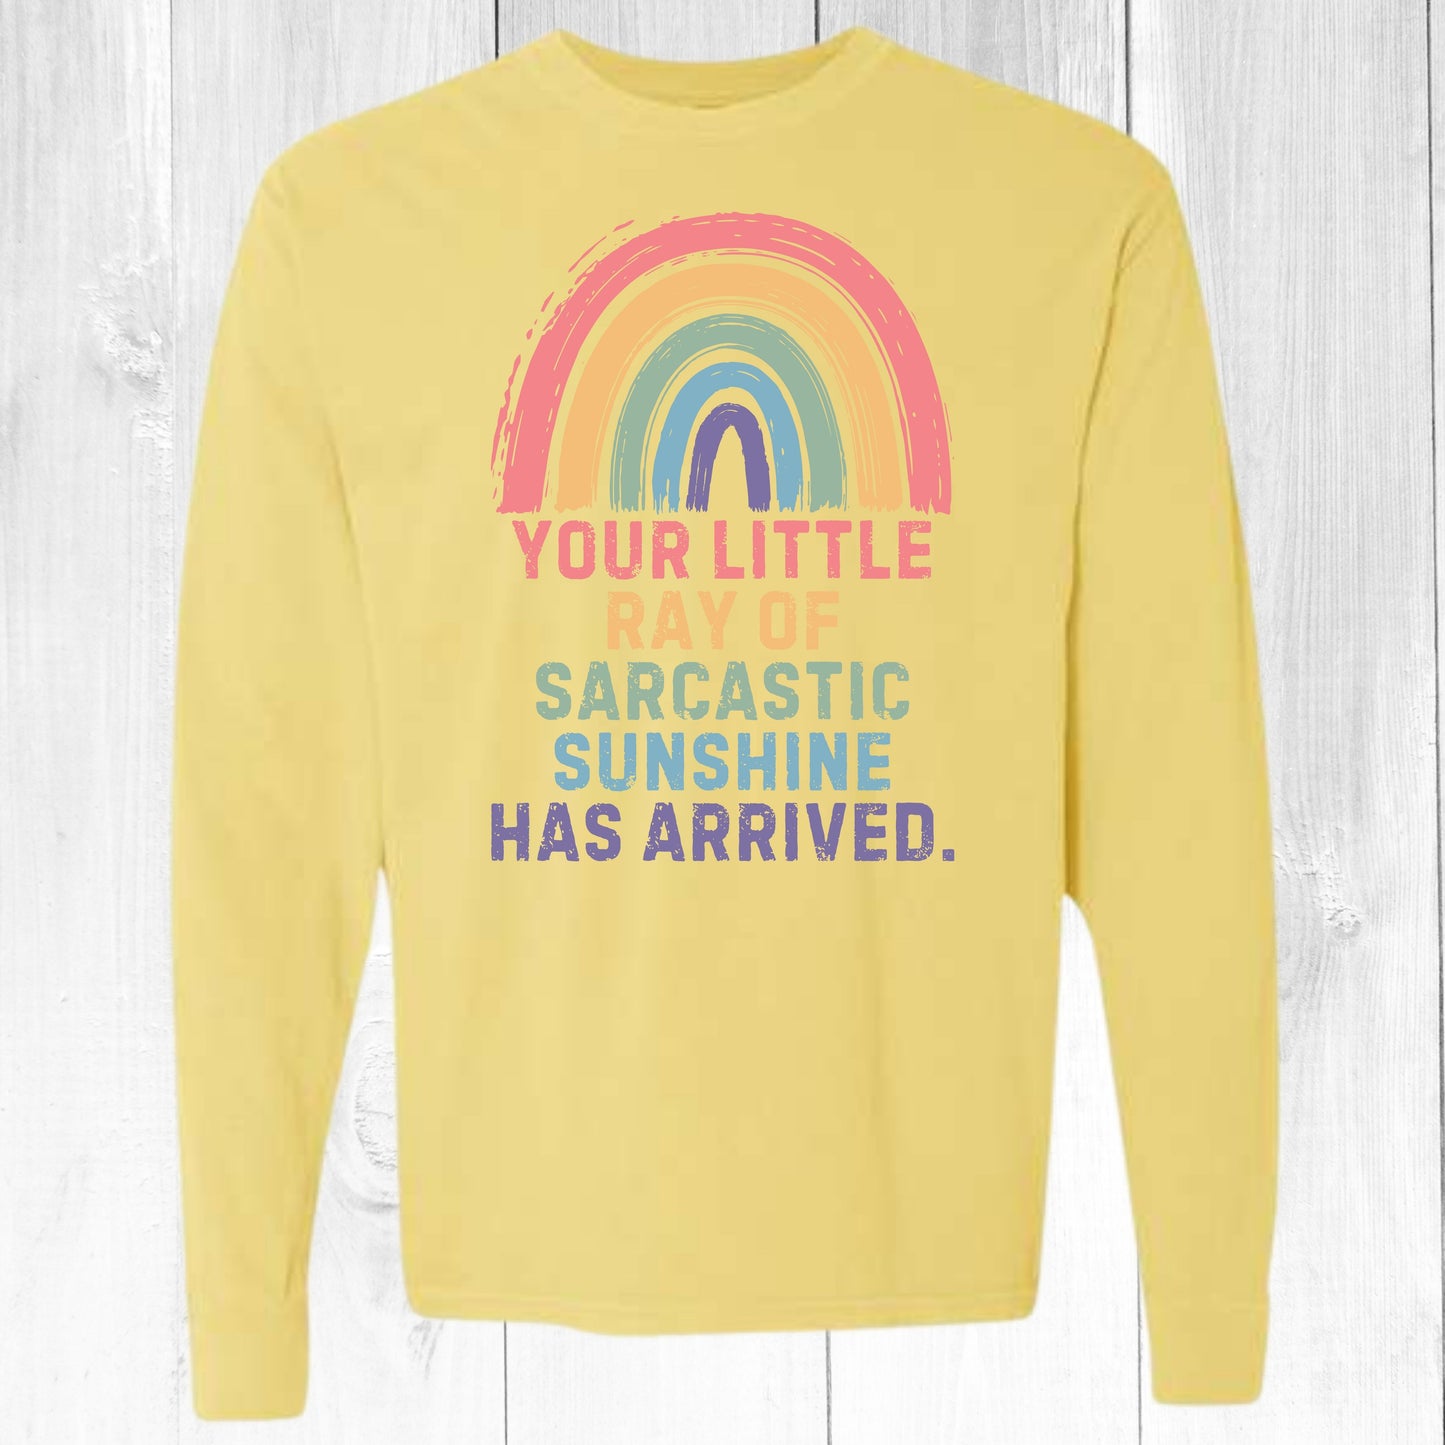 Your Little Ray Of Sarcastic Sunshine Long Sleeve Graphic Tee